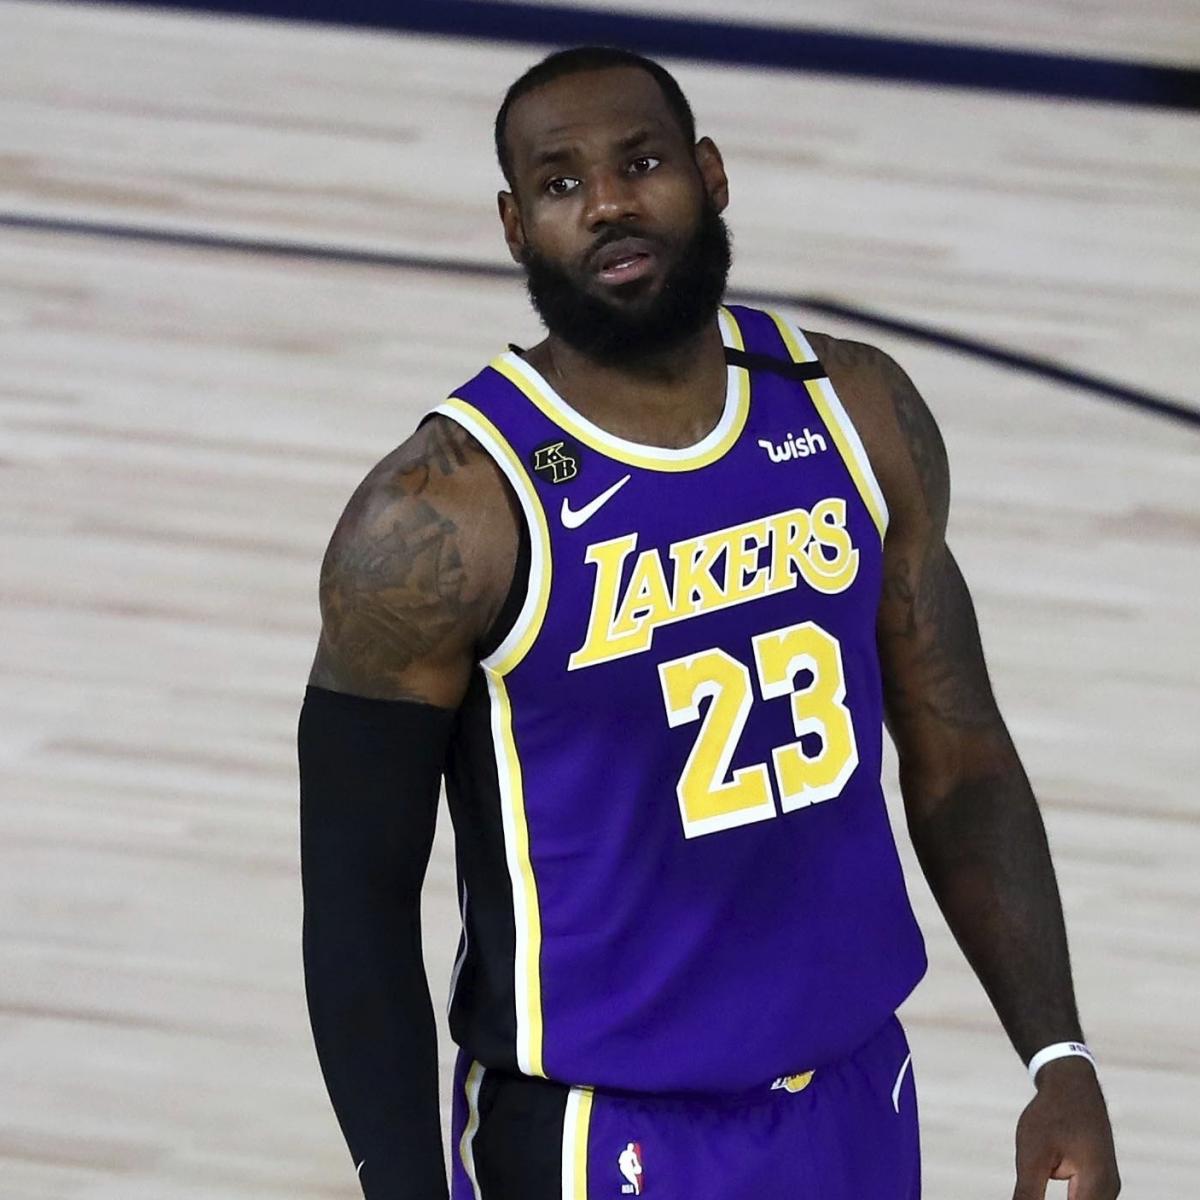 NBA Exec: ‘No one Is Stable in This Surroundings’ After LeBron James, Lakers Losses